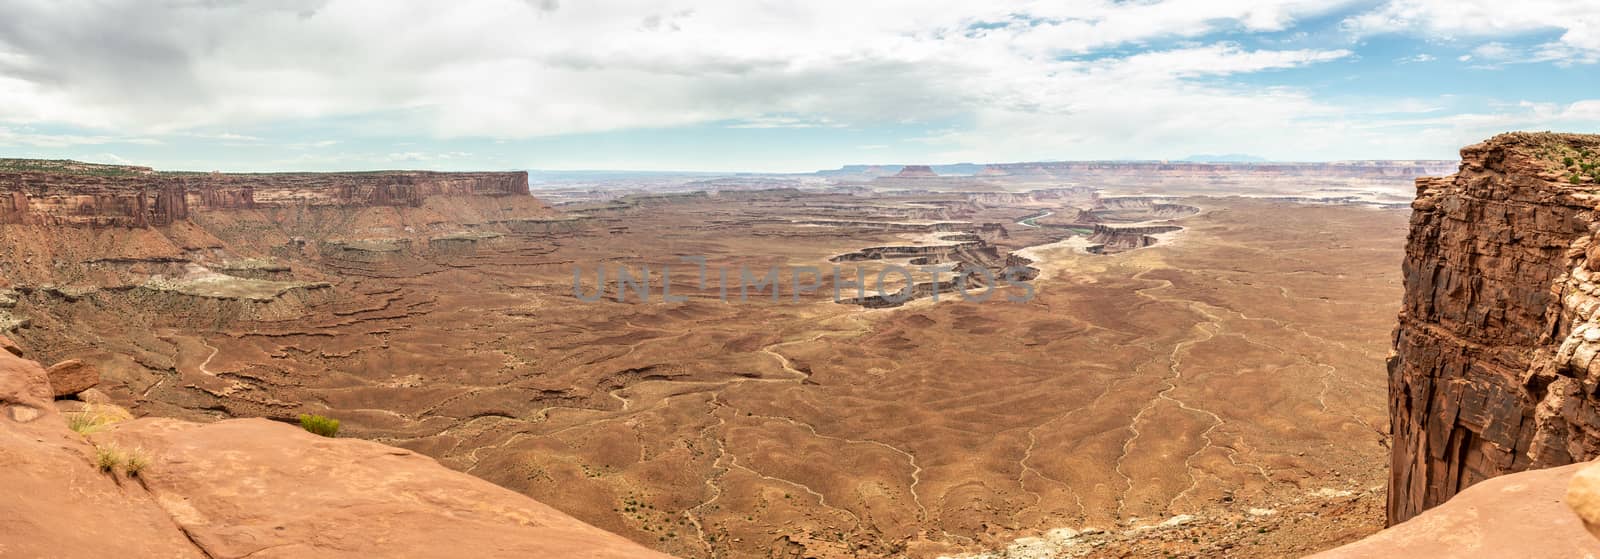 Panorama from Green River Overlook in Canyonlands National Park, Utah by Njean